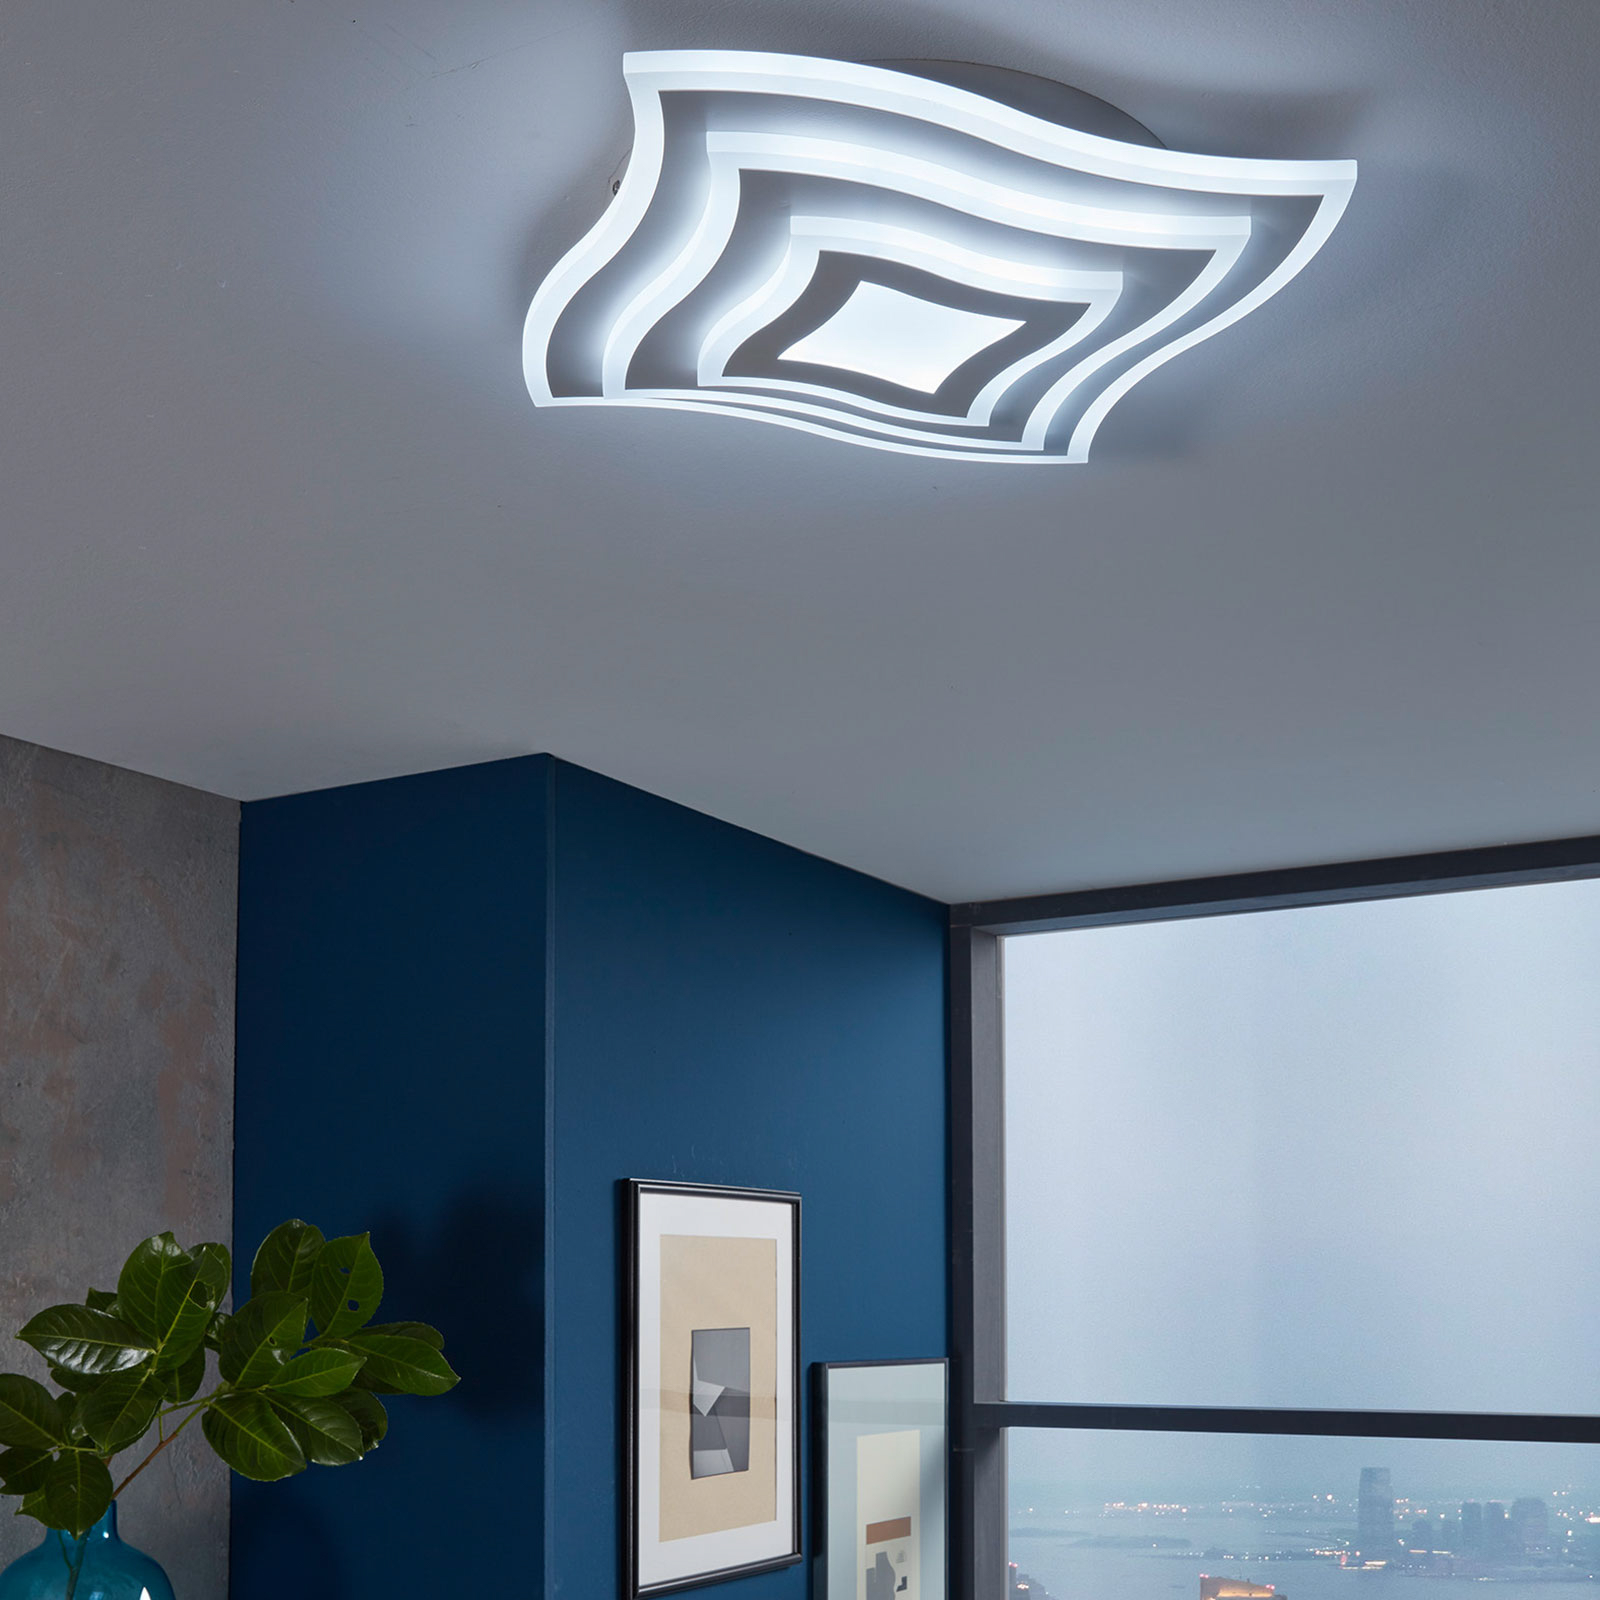 LED ceiling light Gorden with remote control, frame